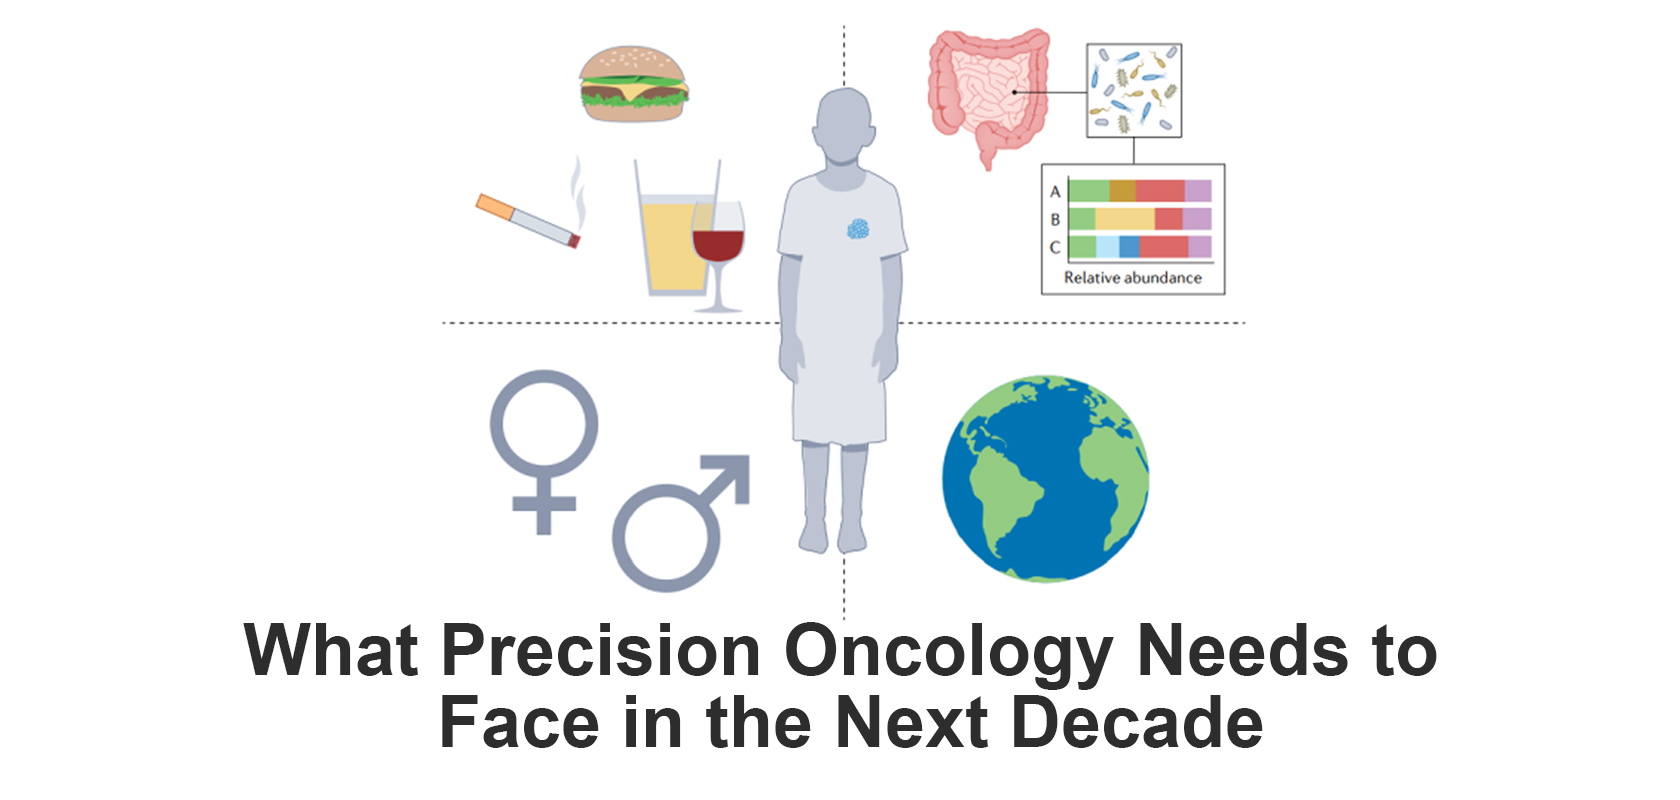 What Precision Oncology Needs to Face in the Next Decade